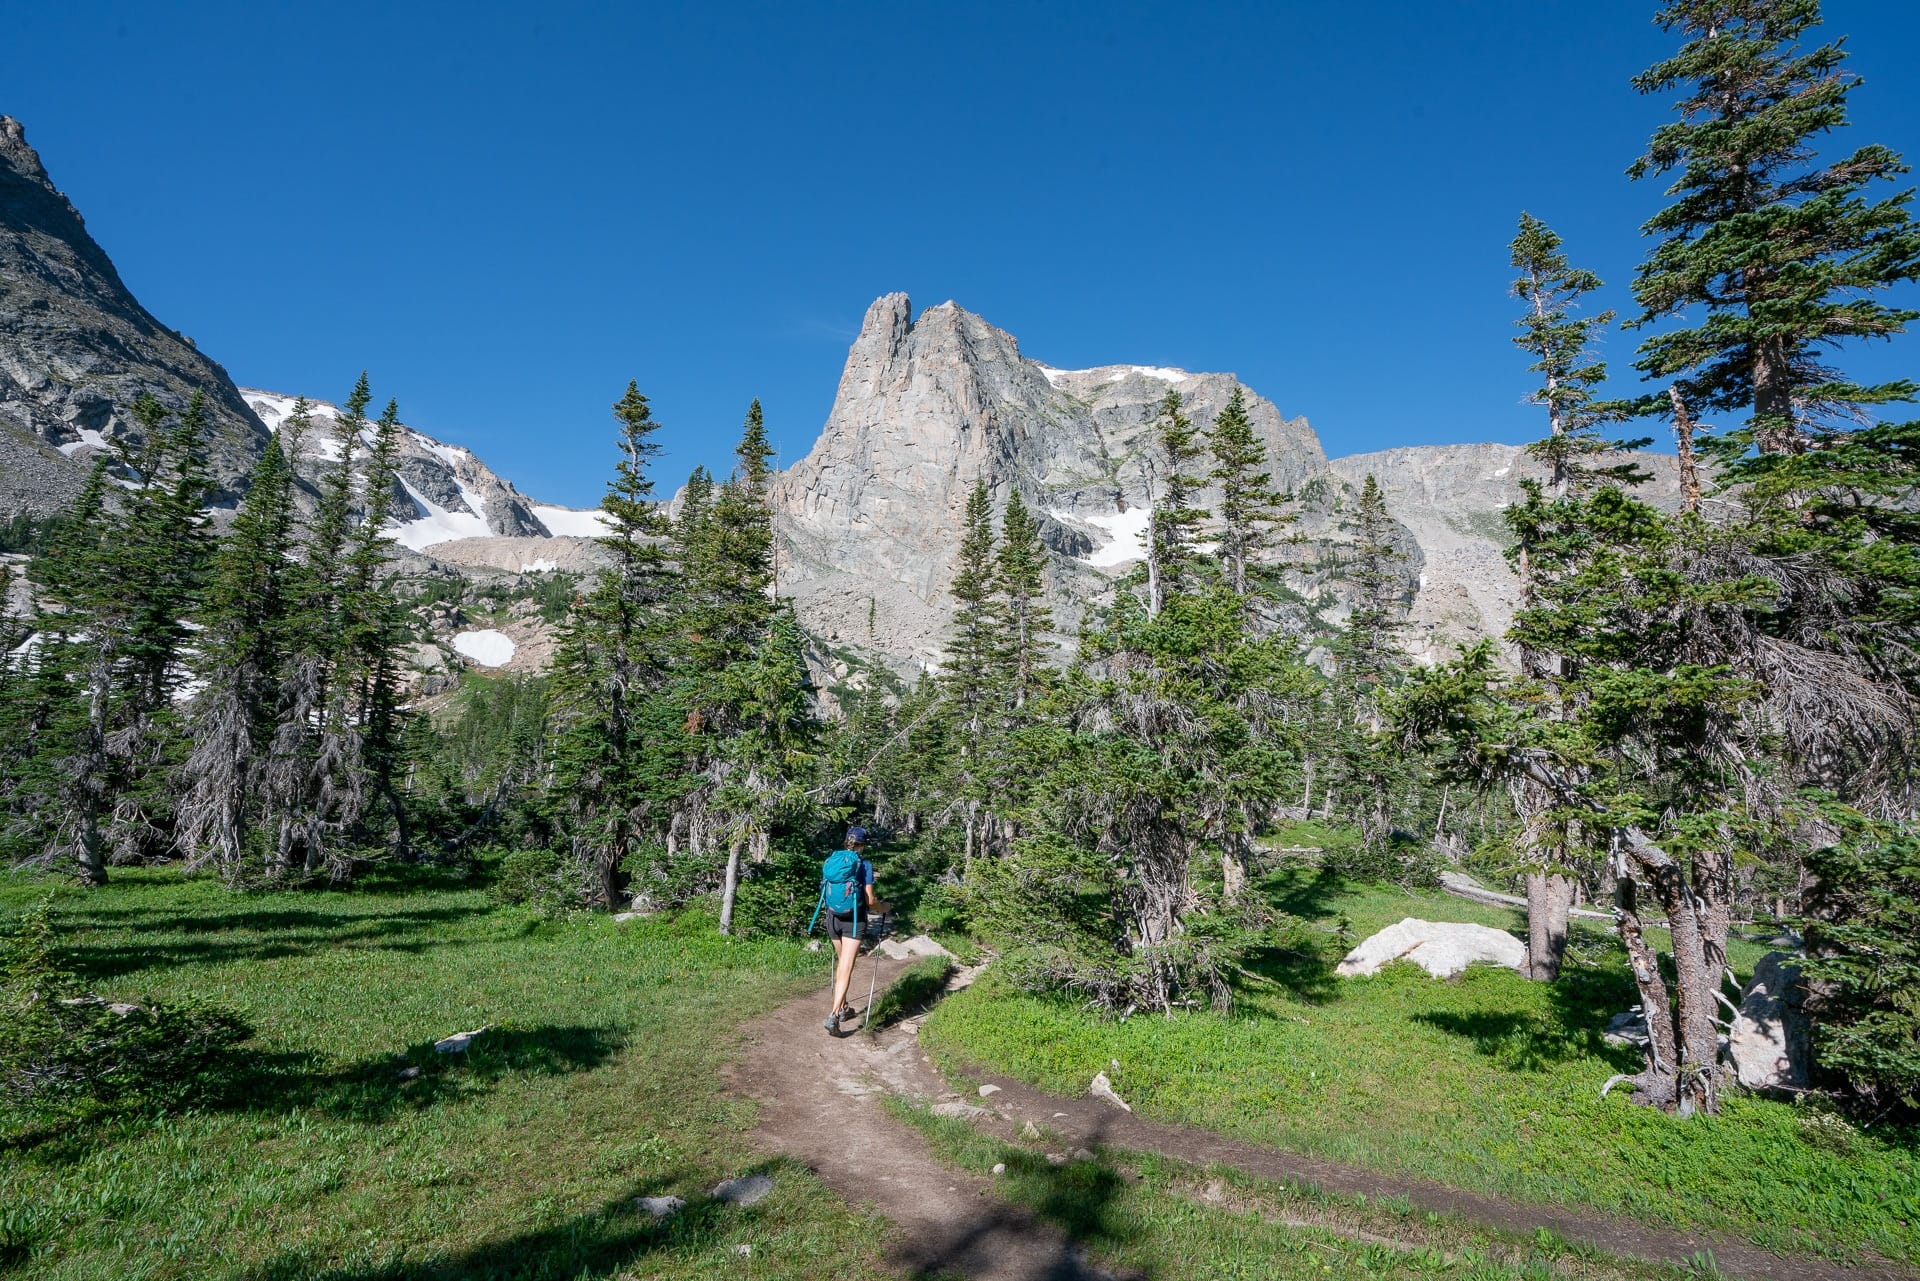 Get our guide to the best day hikes in Rocky Mountain National Park, learn how to choose an awesome hike with great scenery.